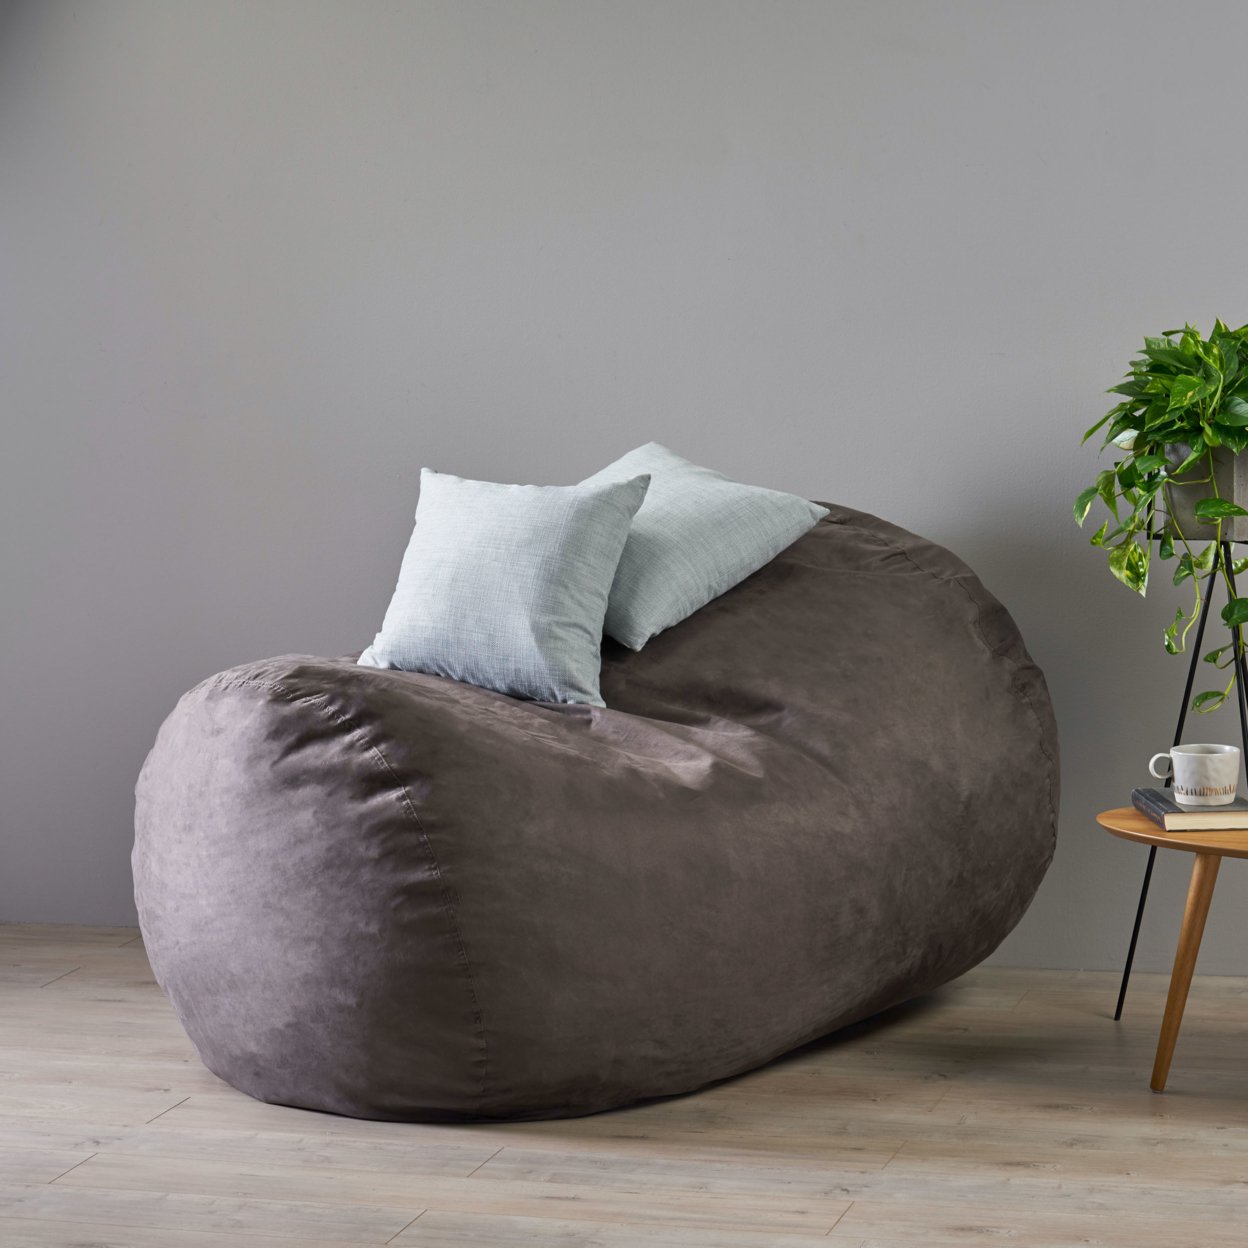 Haley 6.5 Ft Suede Bean Bag - Charcoal